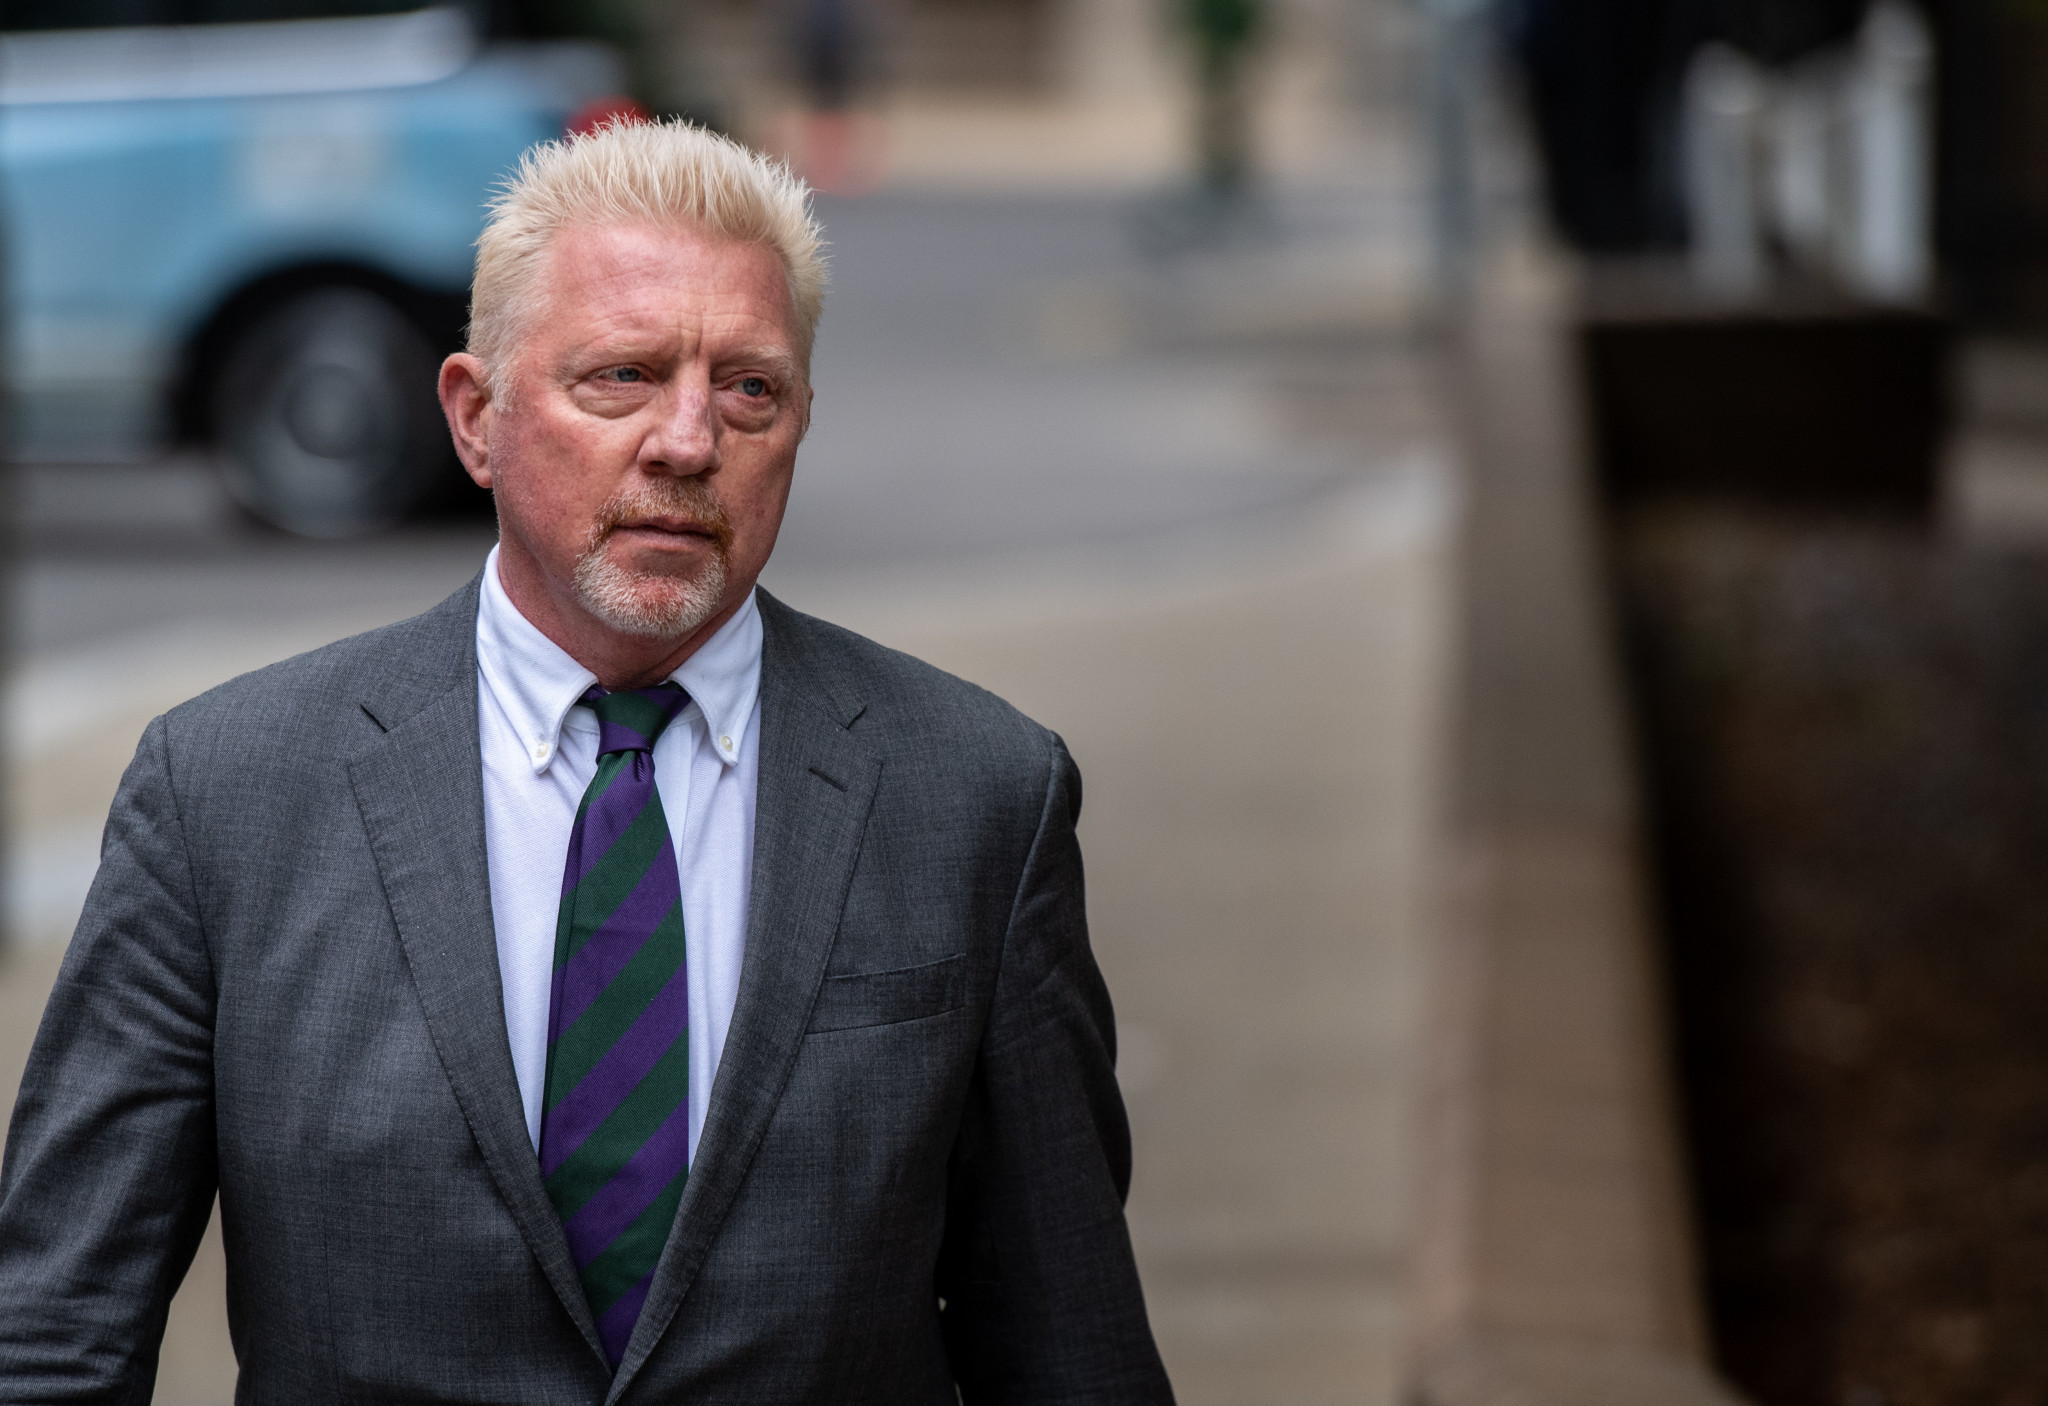 Boris Becker wore Wimbledon colours to his sentencing in April ©Getty Images